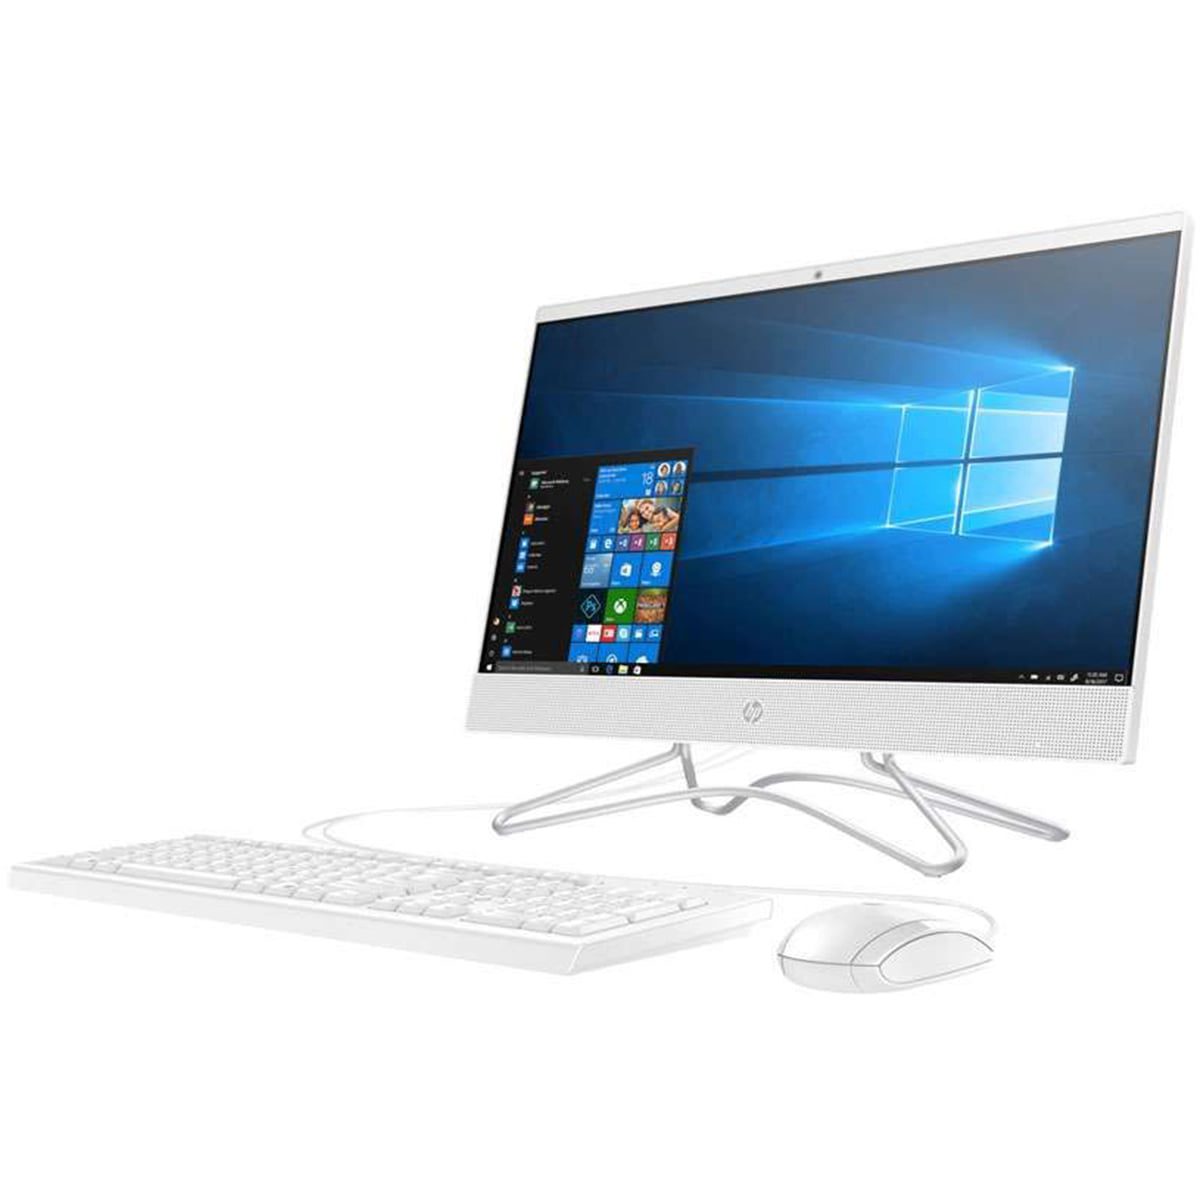 HP 200 G4 21.5" All-in-One Intel 10Gen Core i3 2-Cores NONE Touch Screen - White